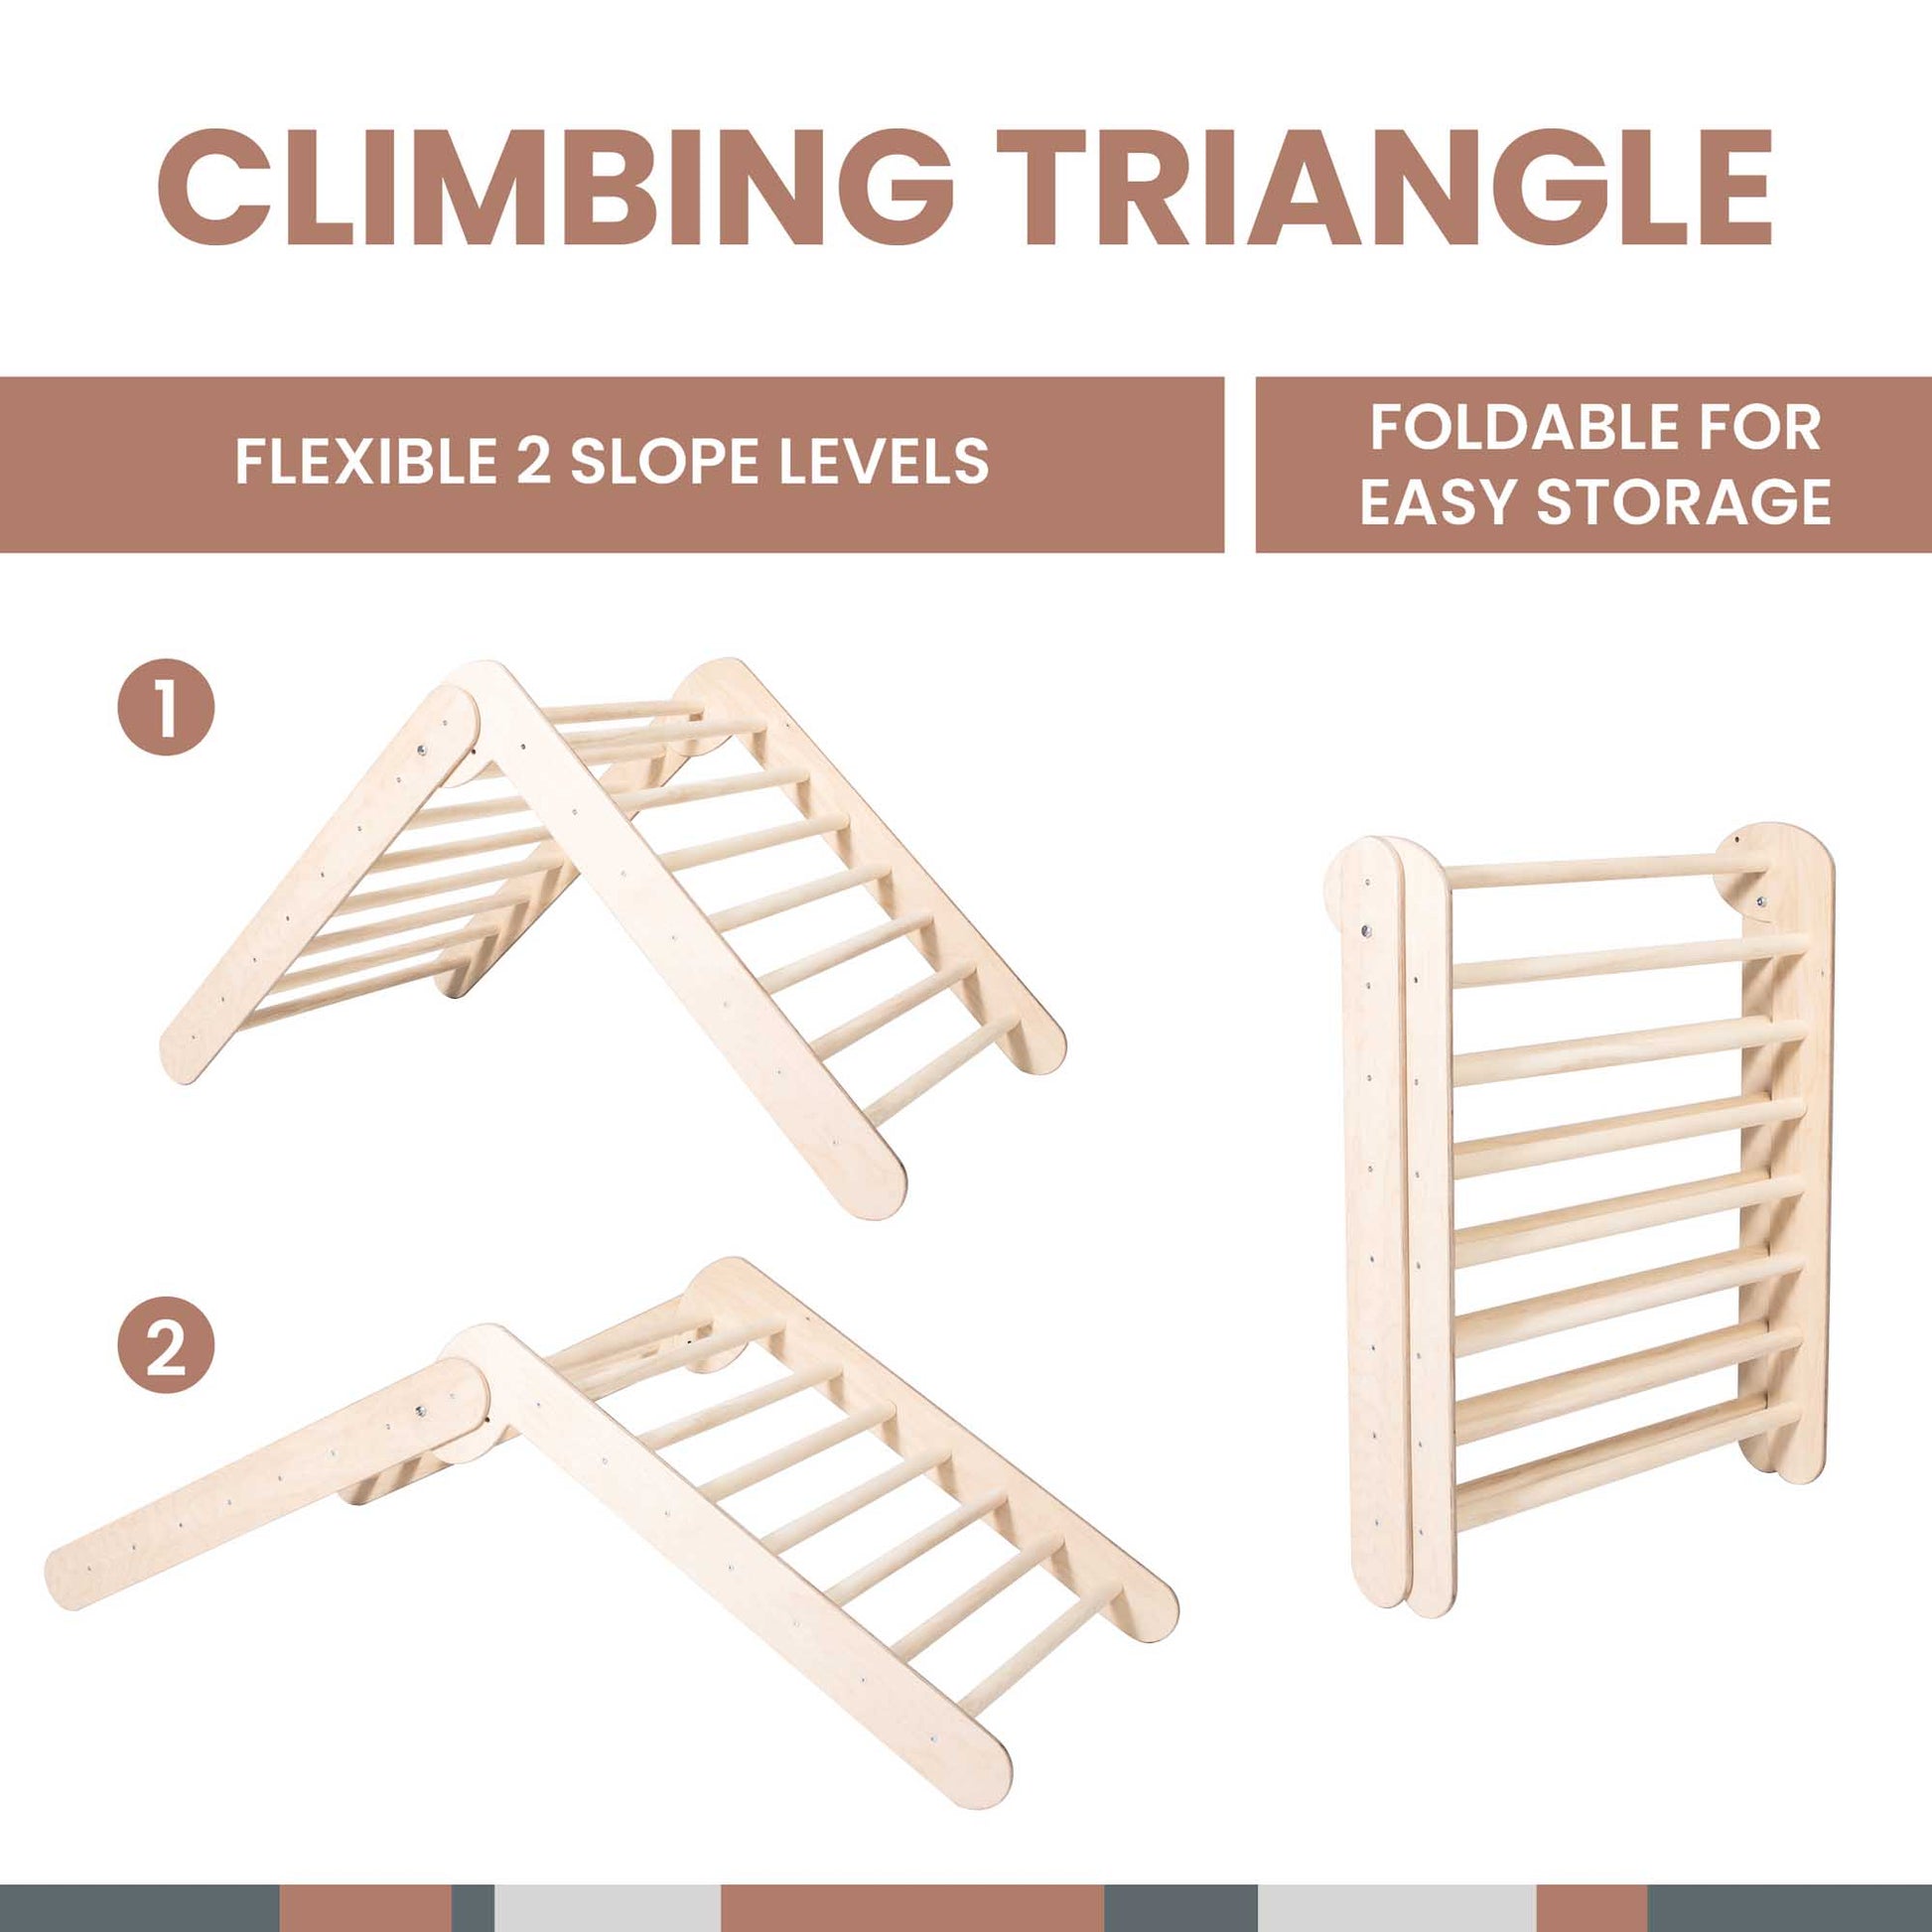 Transformable climbing triangle with two slope levels, showcasing its versatile design. Folds easily for convenient storage.